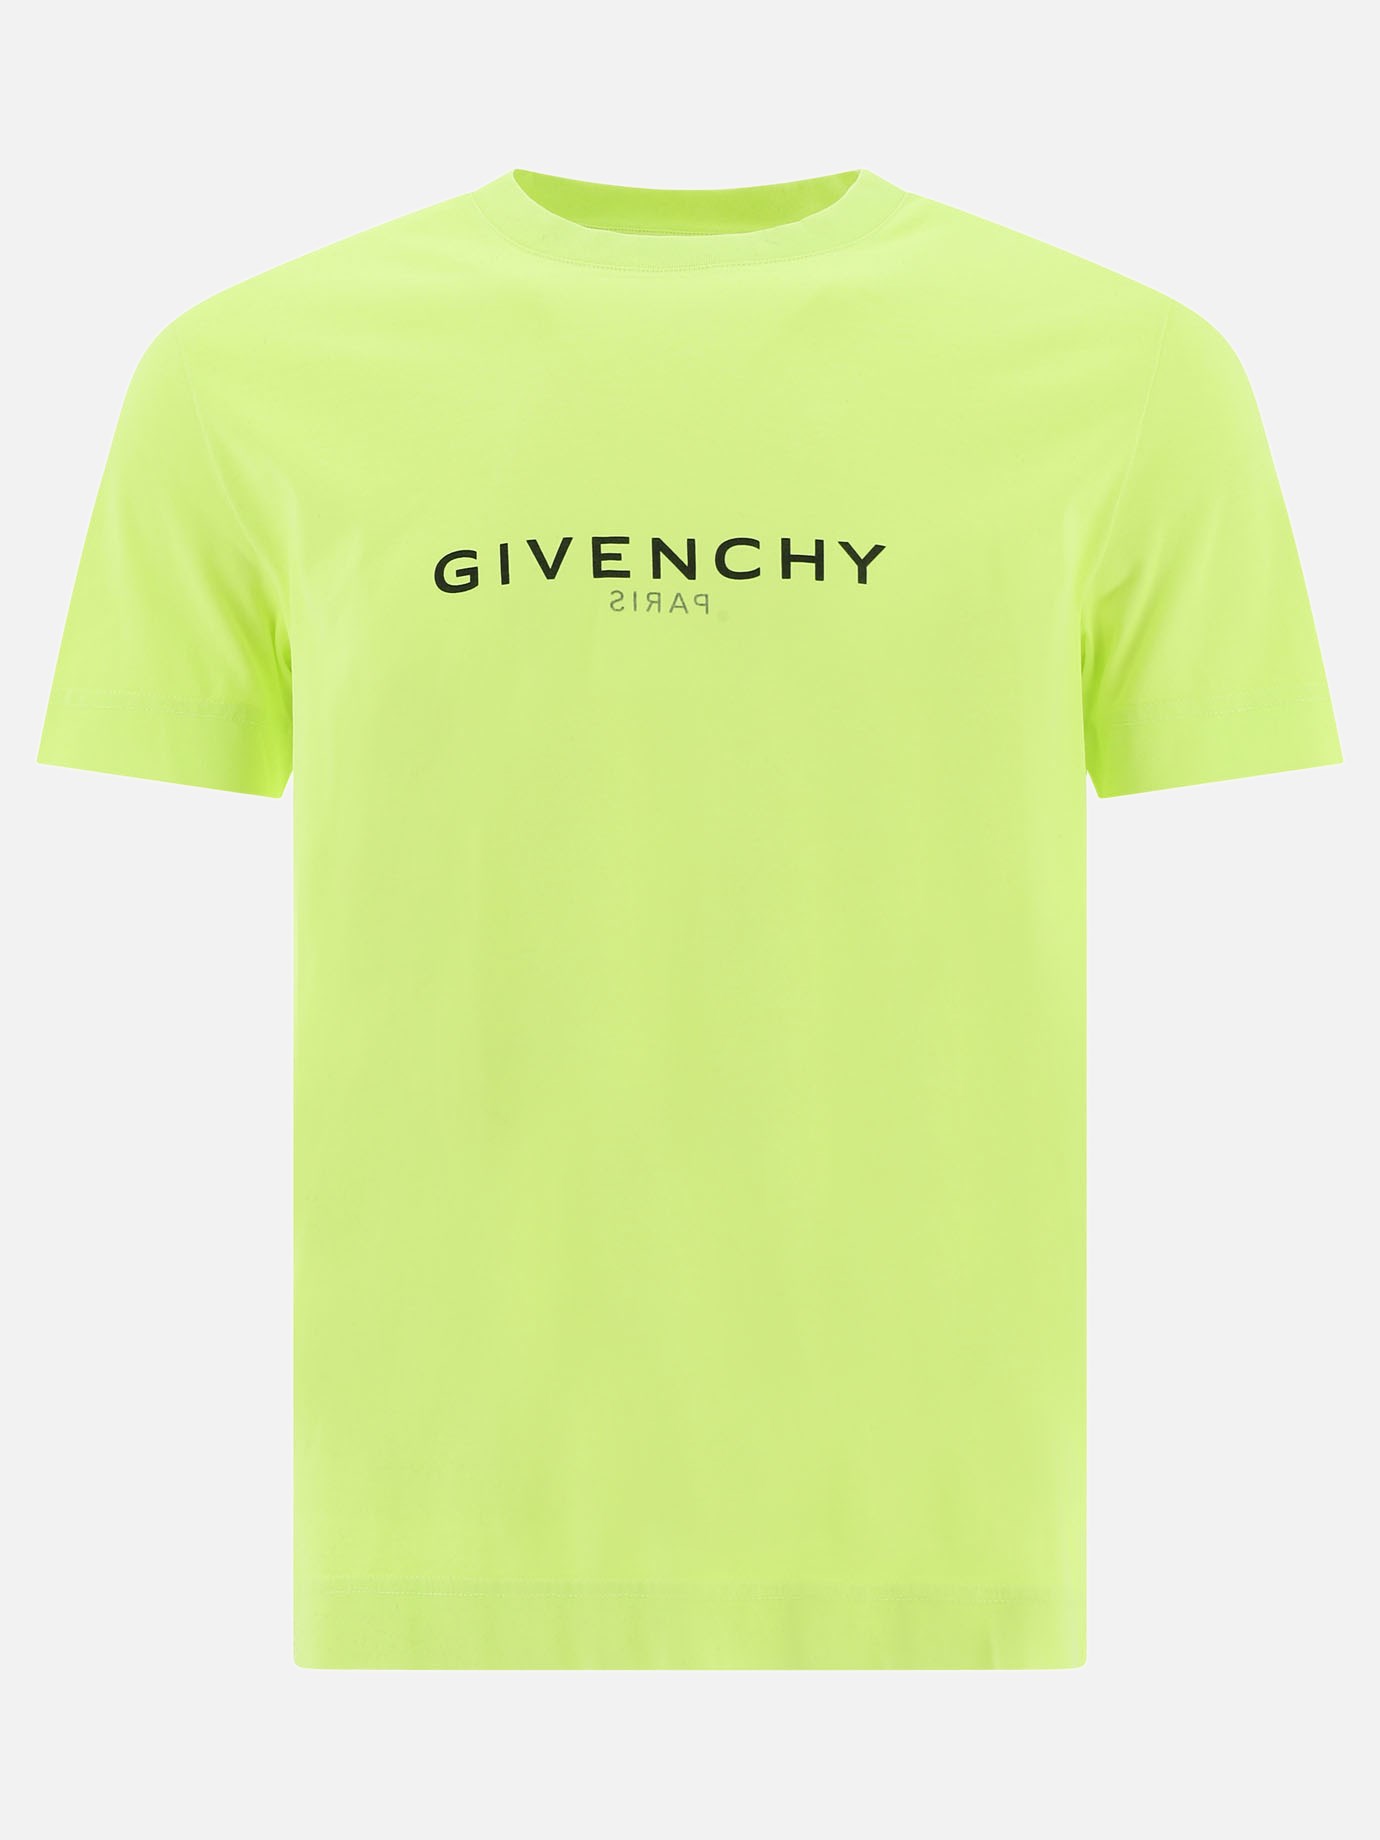  Reverse  t-shirtby Givenchy - 2